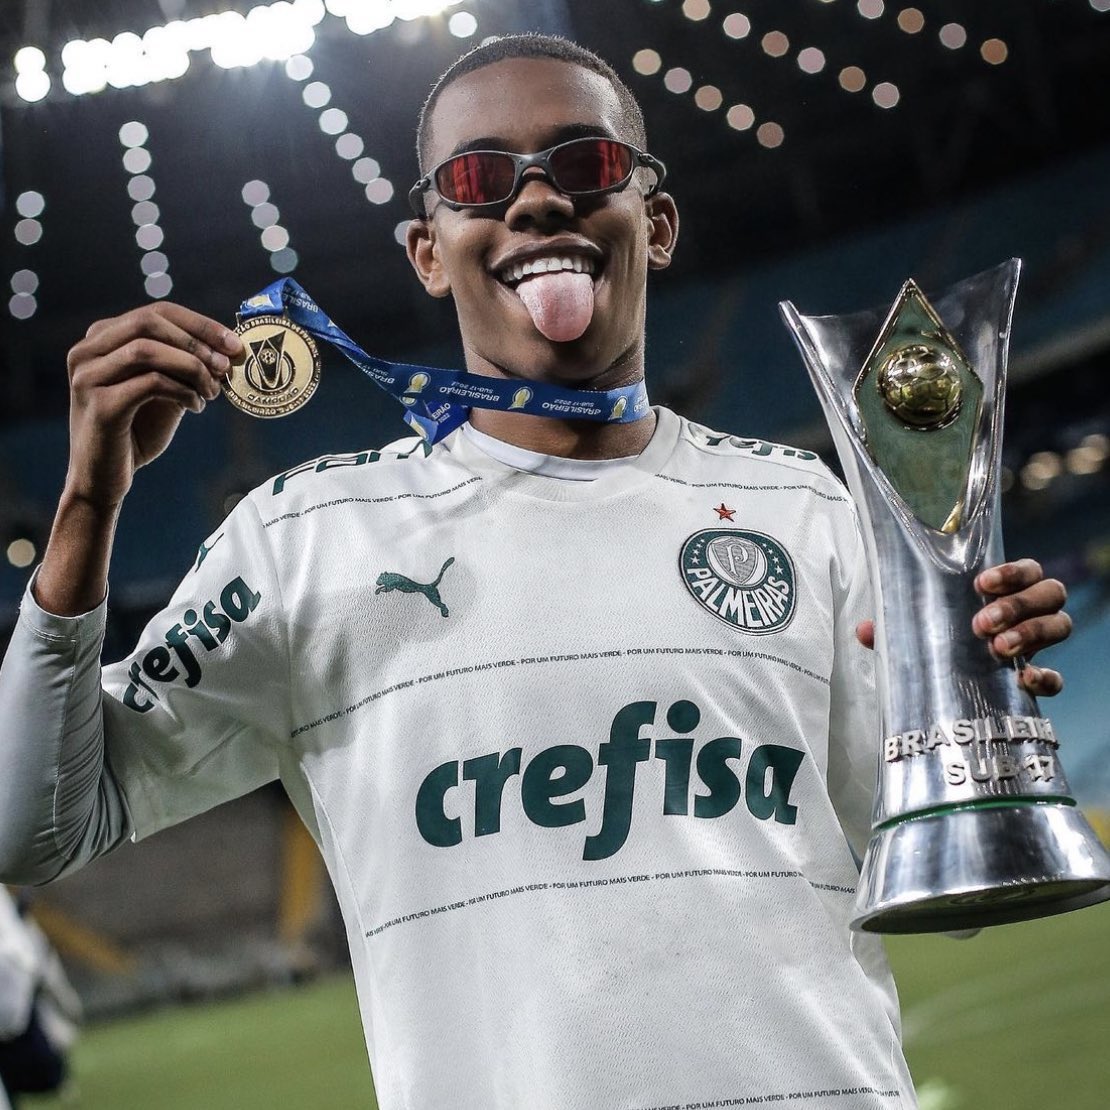 🚨 🇧🇷 BREAKING: According to reports in Brazil, Chelsea is ready to offer Palmeiras up to €55million for Estêvão, with a fixed fee of €30million + €25million upon objectives being accomplished. (@brunoandrd via @UOL)